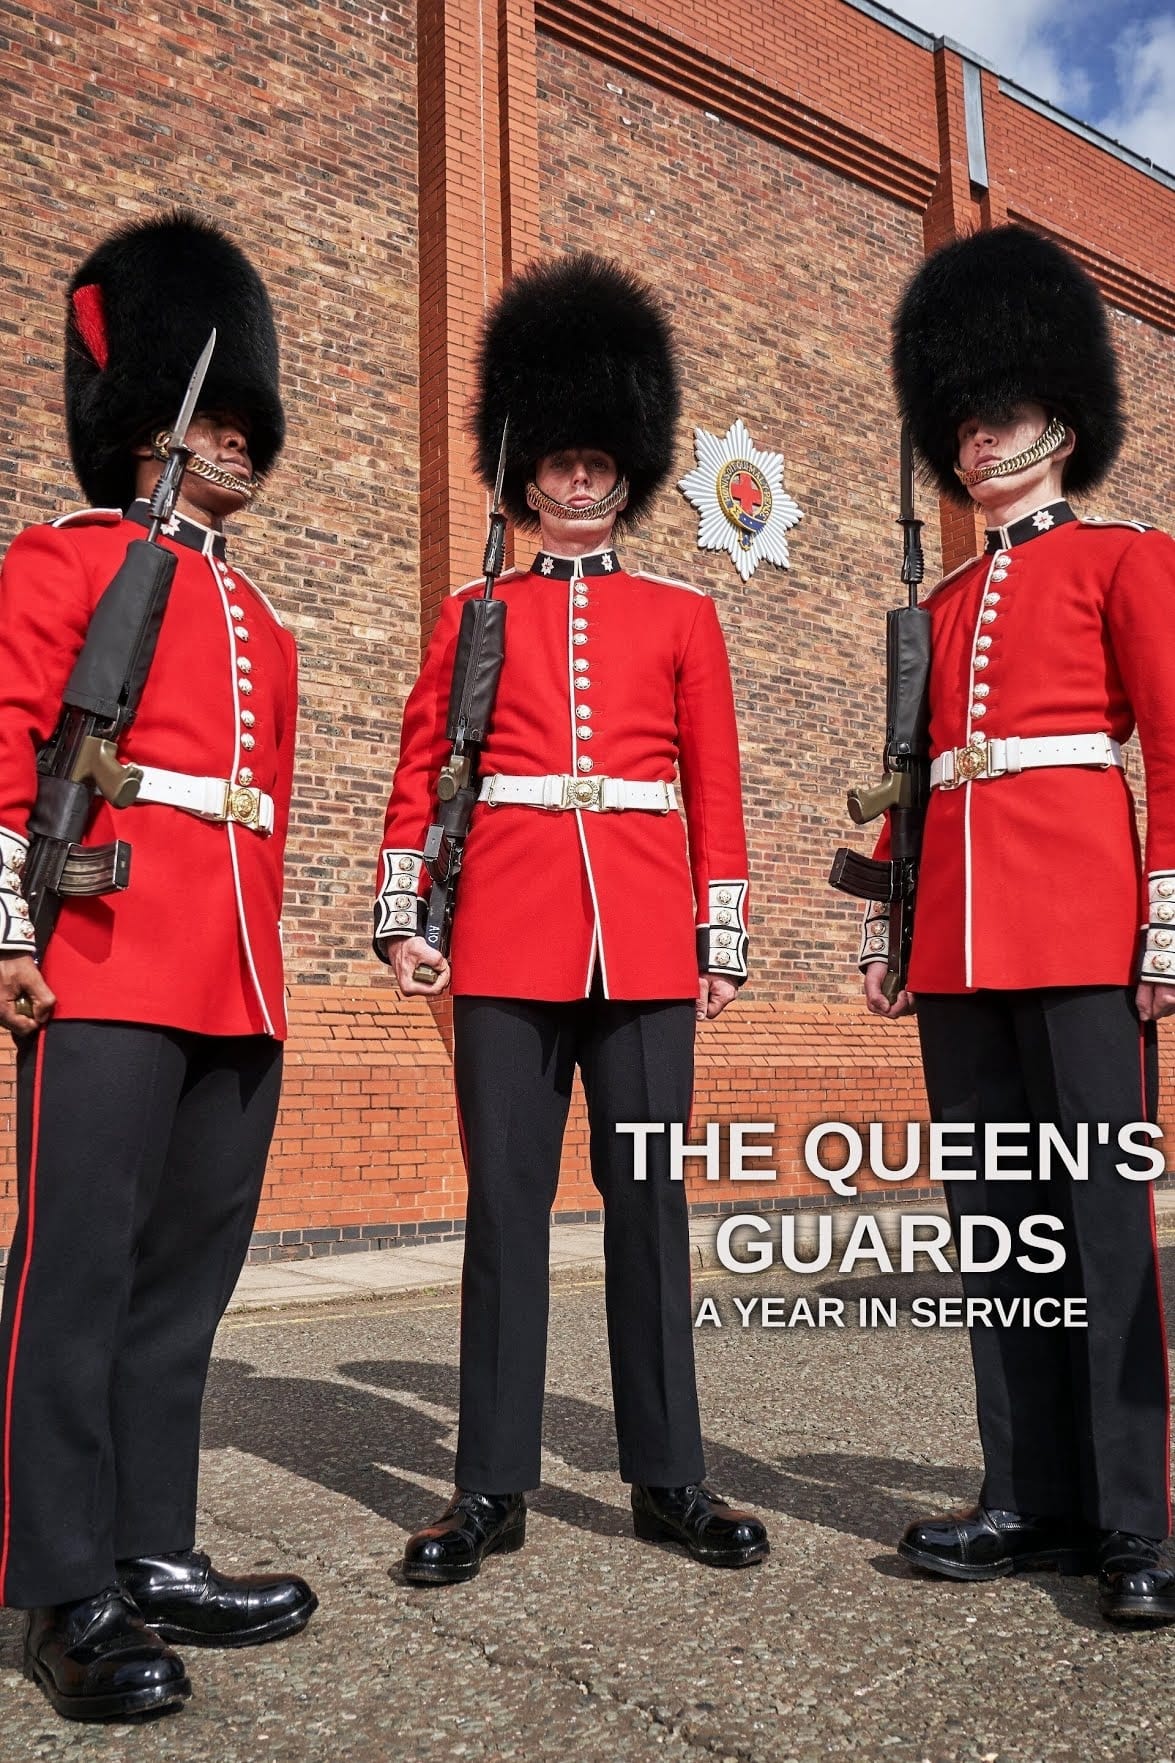 The Queen's Guards: On Her Majesty's Service TV Shows About Military